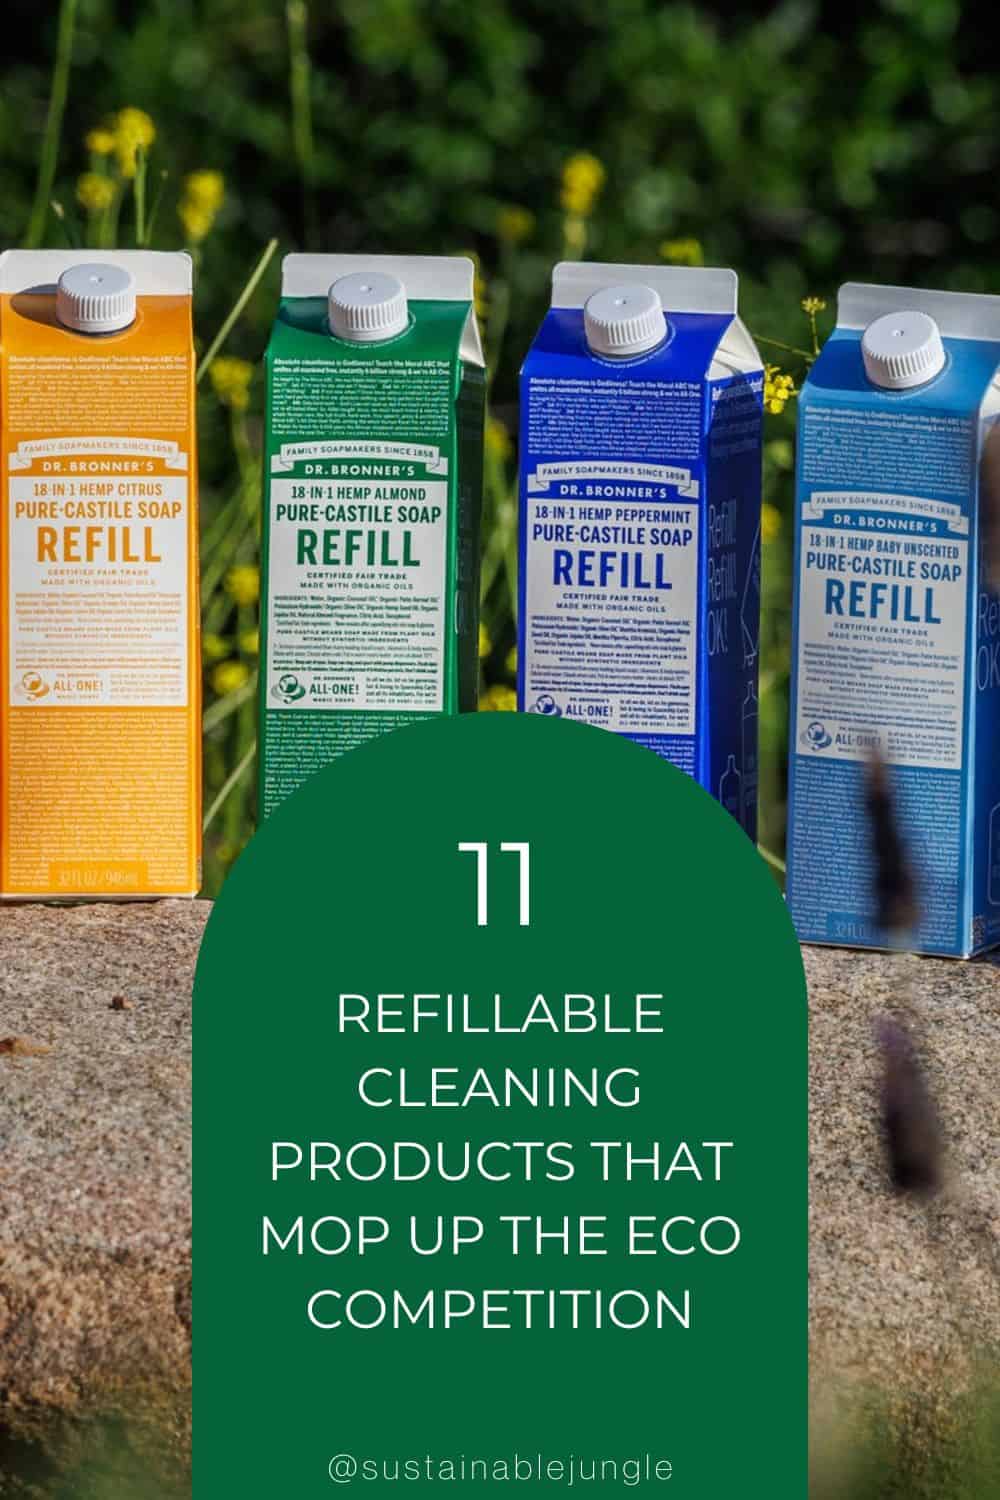 11 Refillable Cleaning Products That Mop Up The Eco Competition Image by Dr. Bronner’s #refillablecleaningproducts #reusablecleaningproducts #refillcleaningproducts #reusablecleaningsupplies #bestrefillablecleaningproducts #cleaningrefills #sustainablejungle